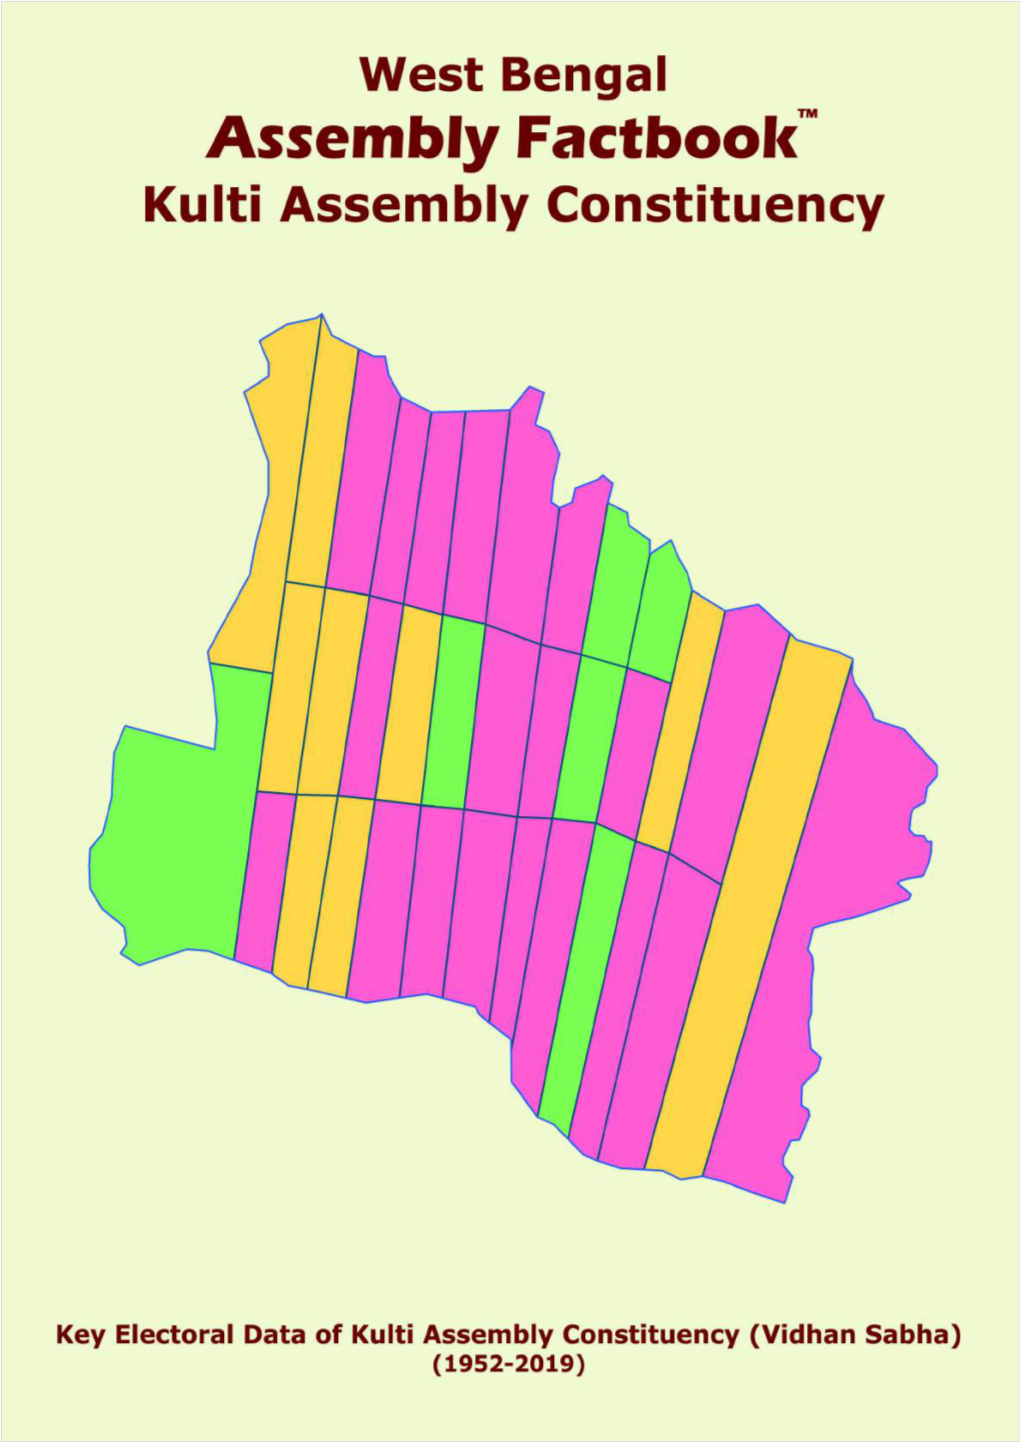 Kulti Assembly West Bengal Factbook